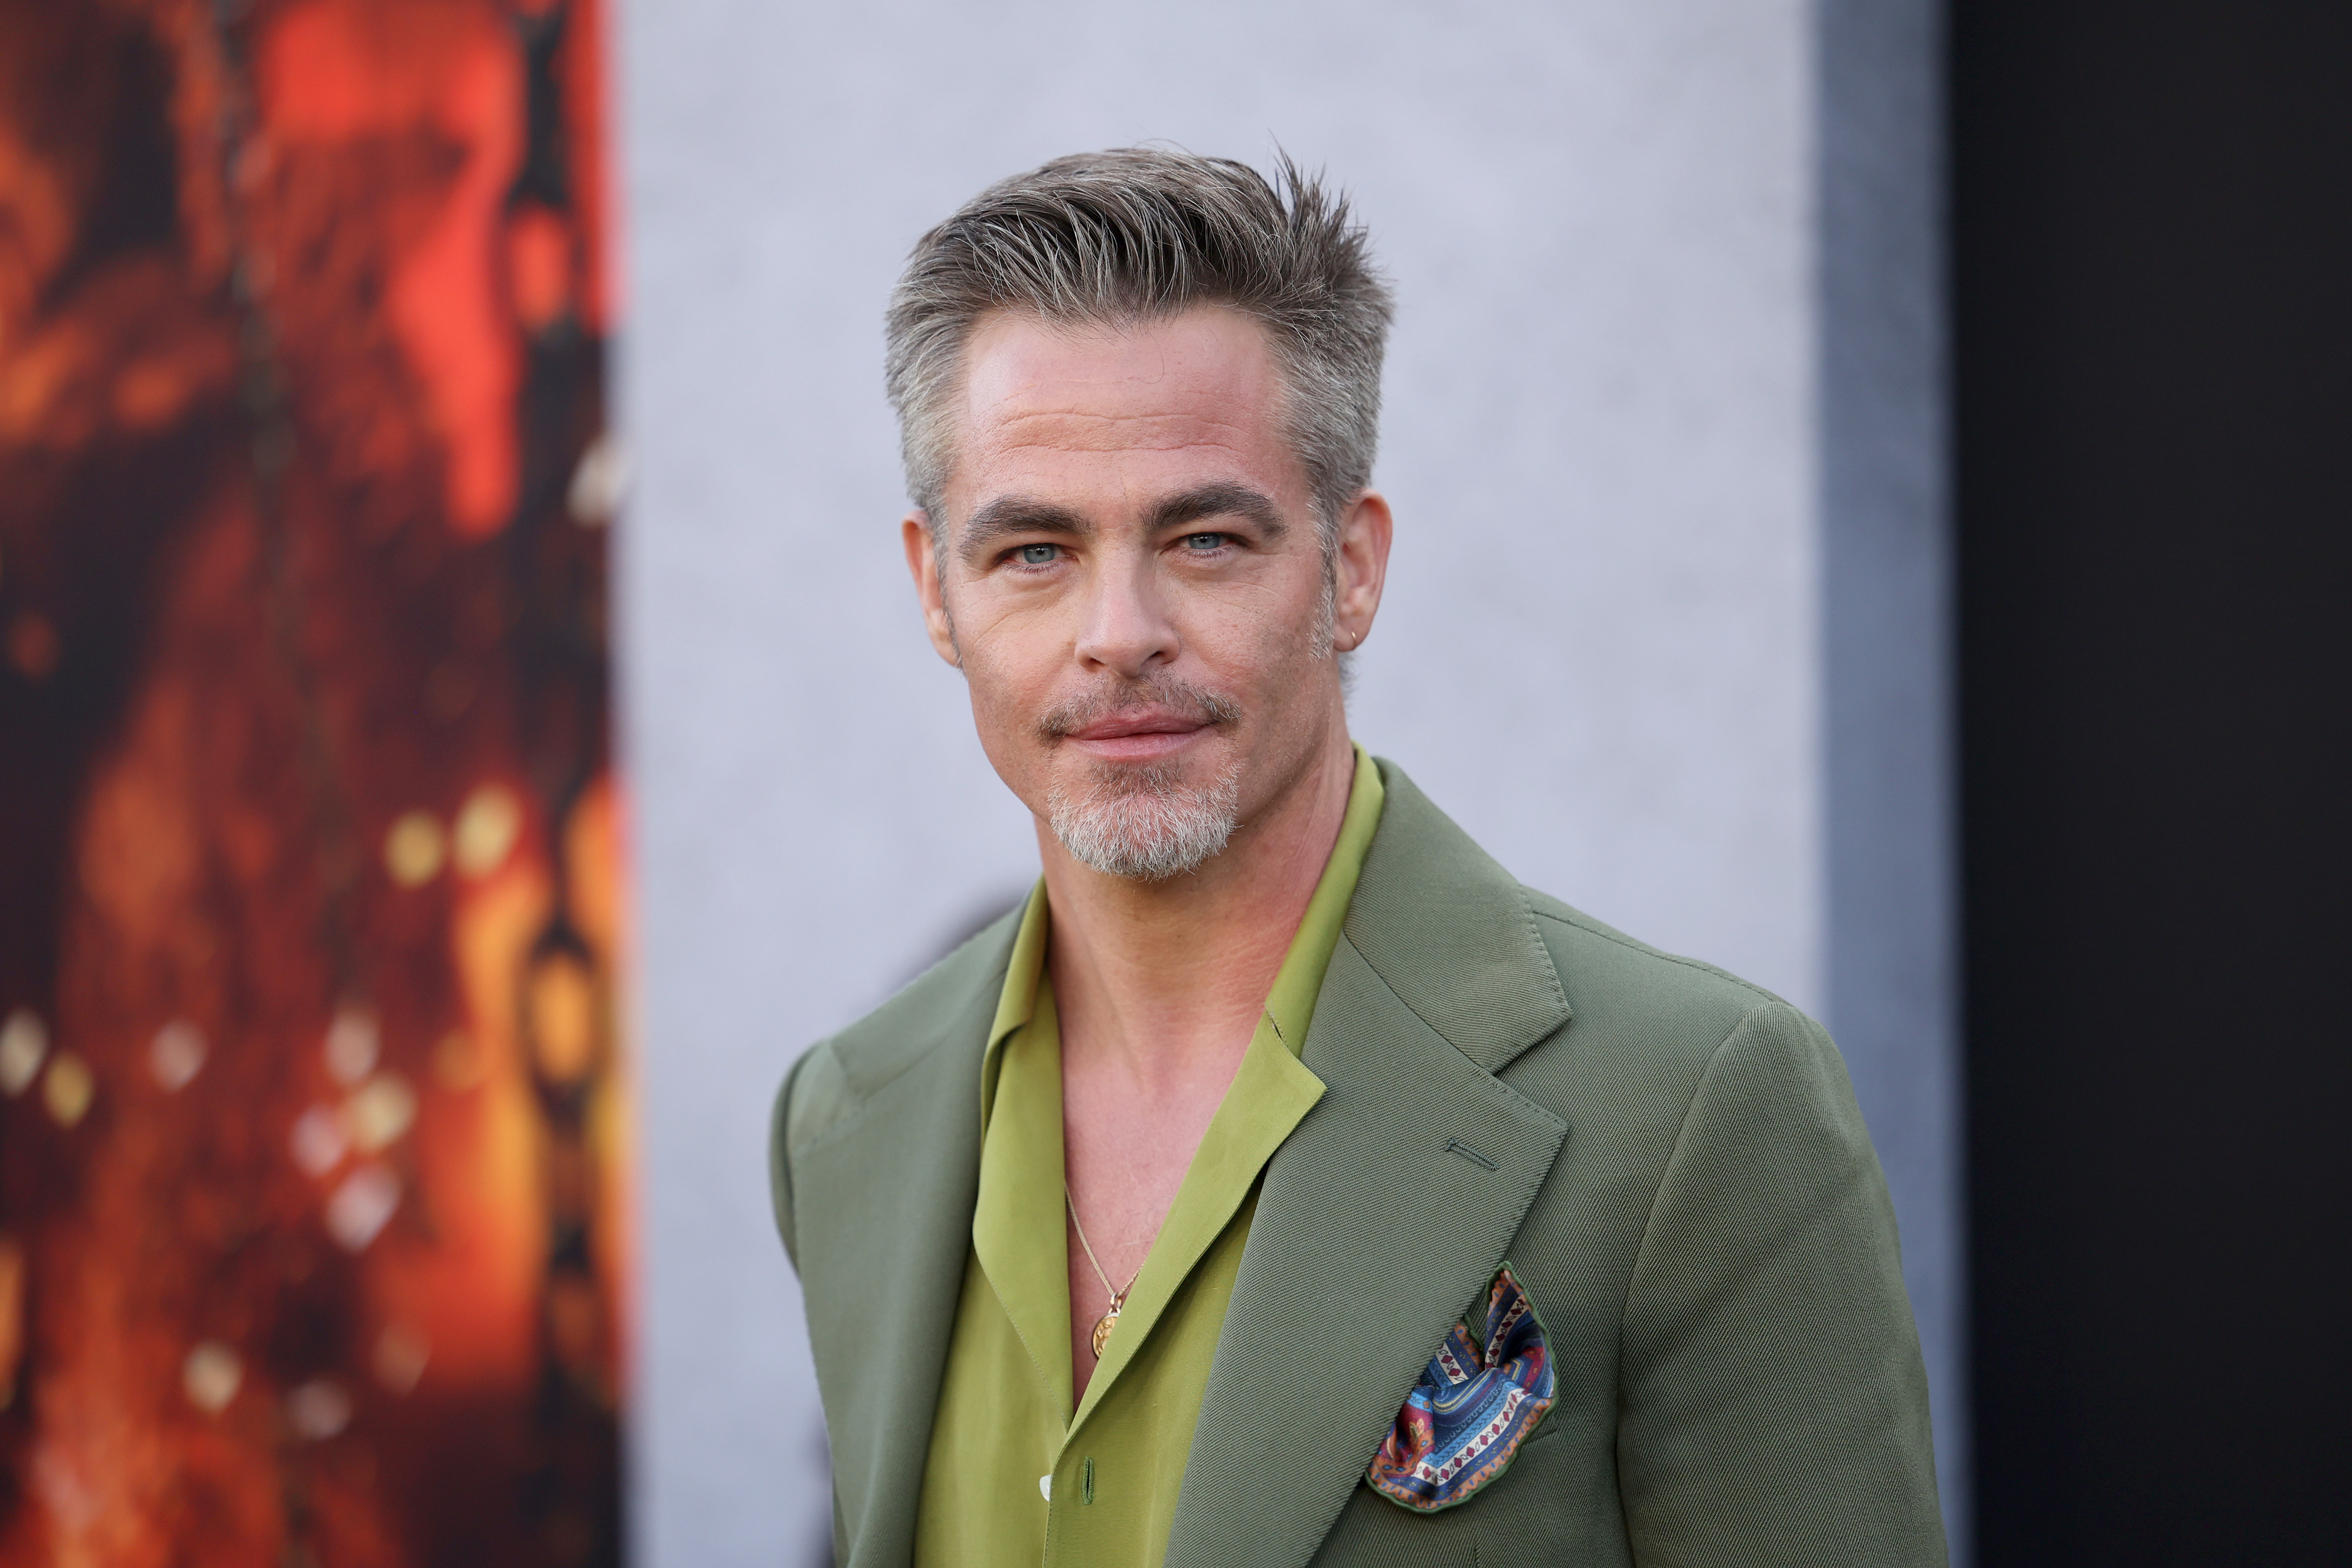 Chris Pine at the premiere of "Dungeons & Dragons: Honor Among Thieves" on March 26, 2023 in Los Angeles, California. | Source: Getty Images